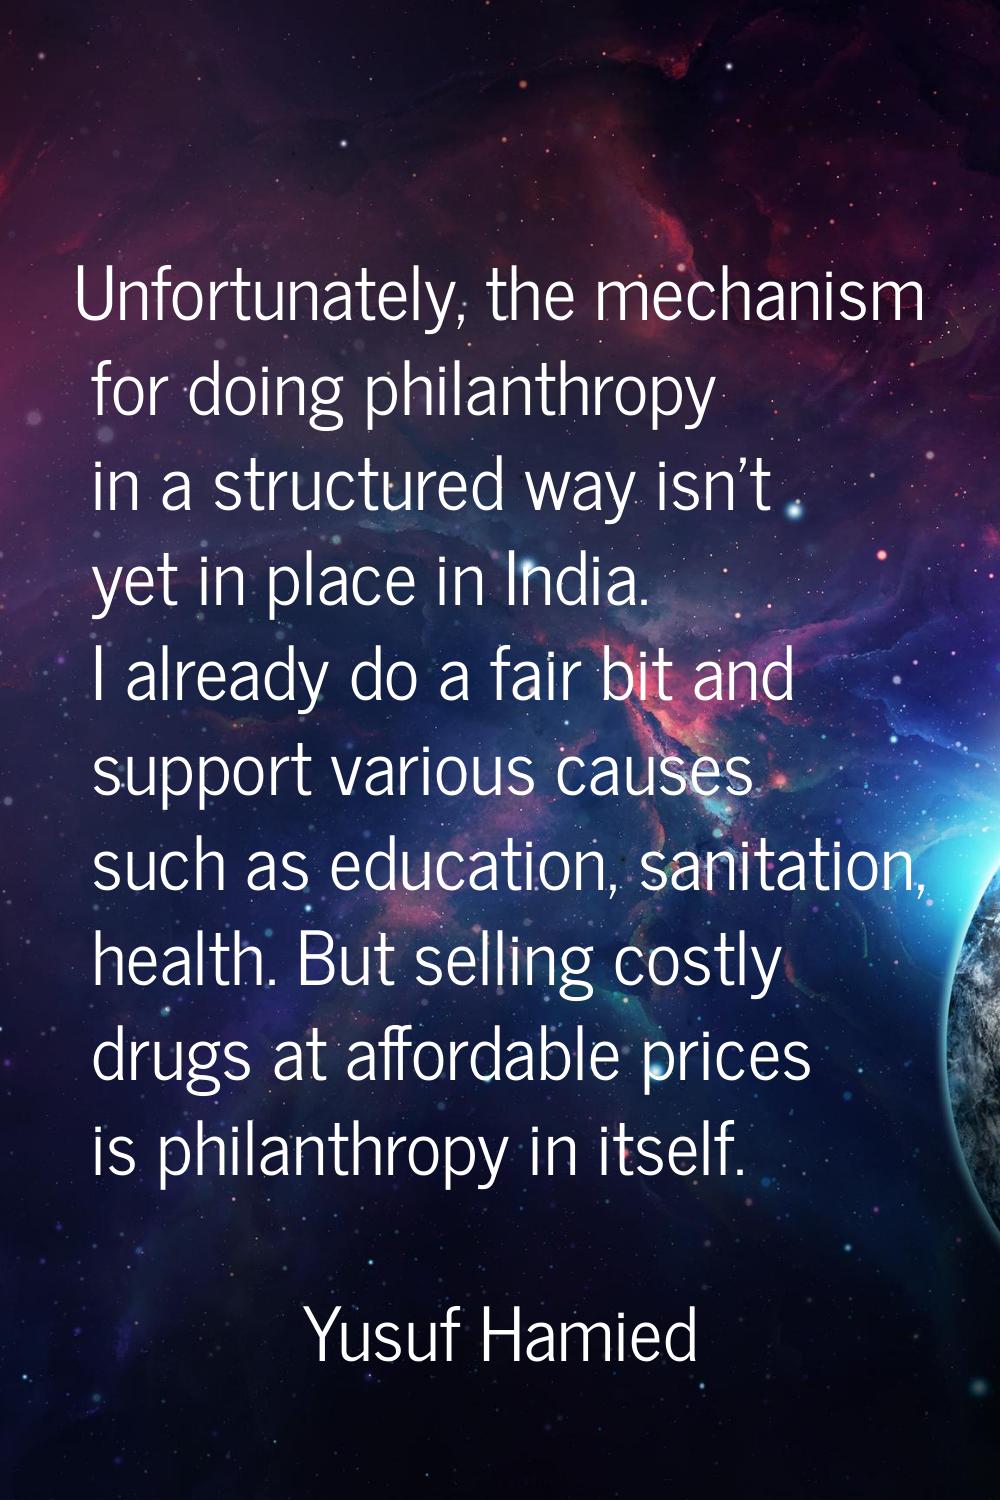 Unfortunately, the mechanism for doing philanthropy in a structured way isn't yet in place in India